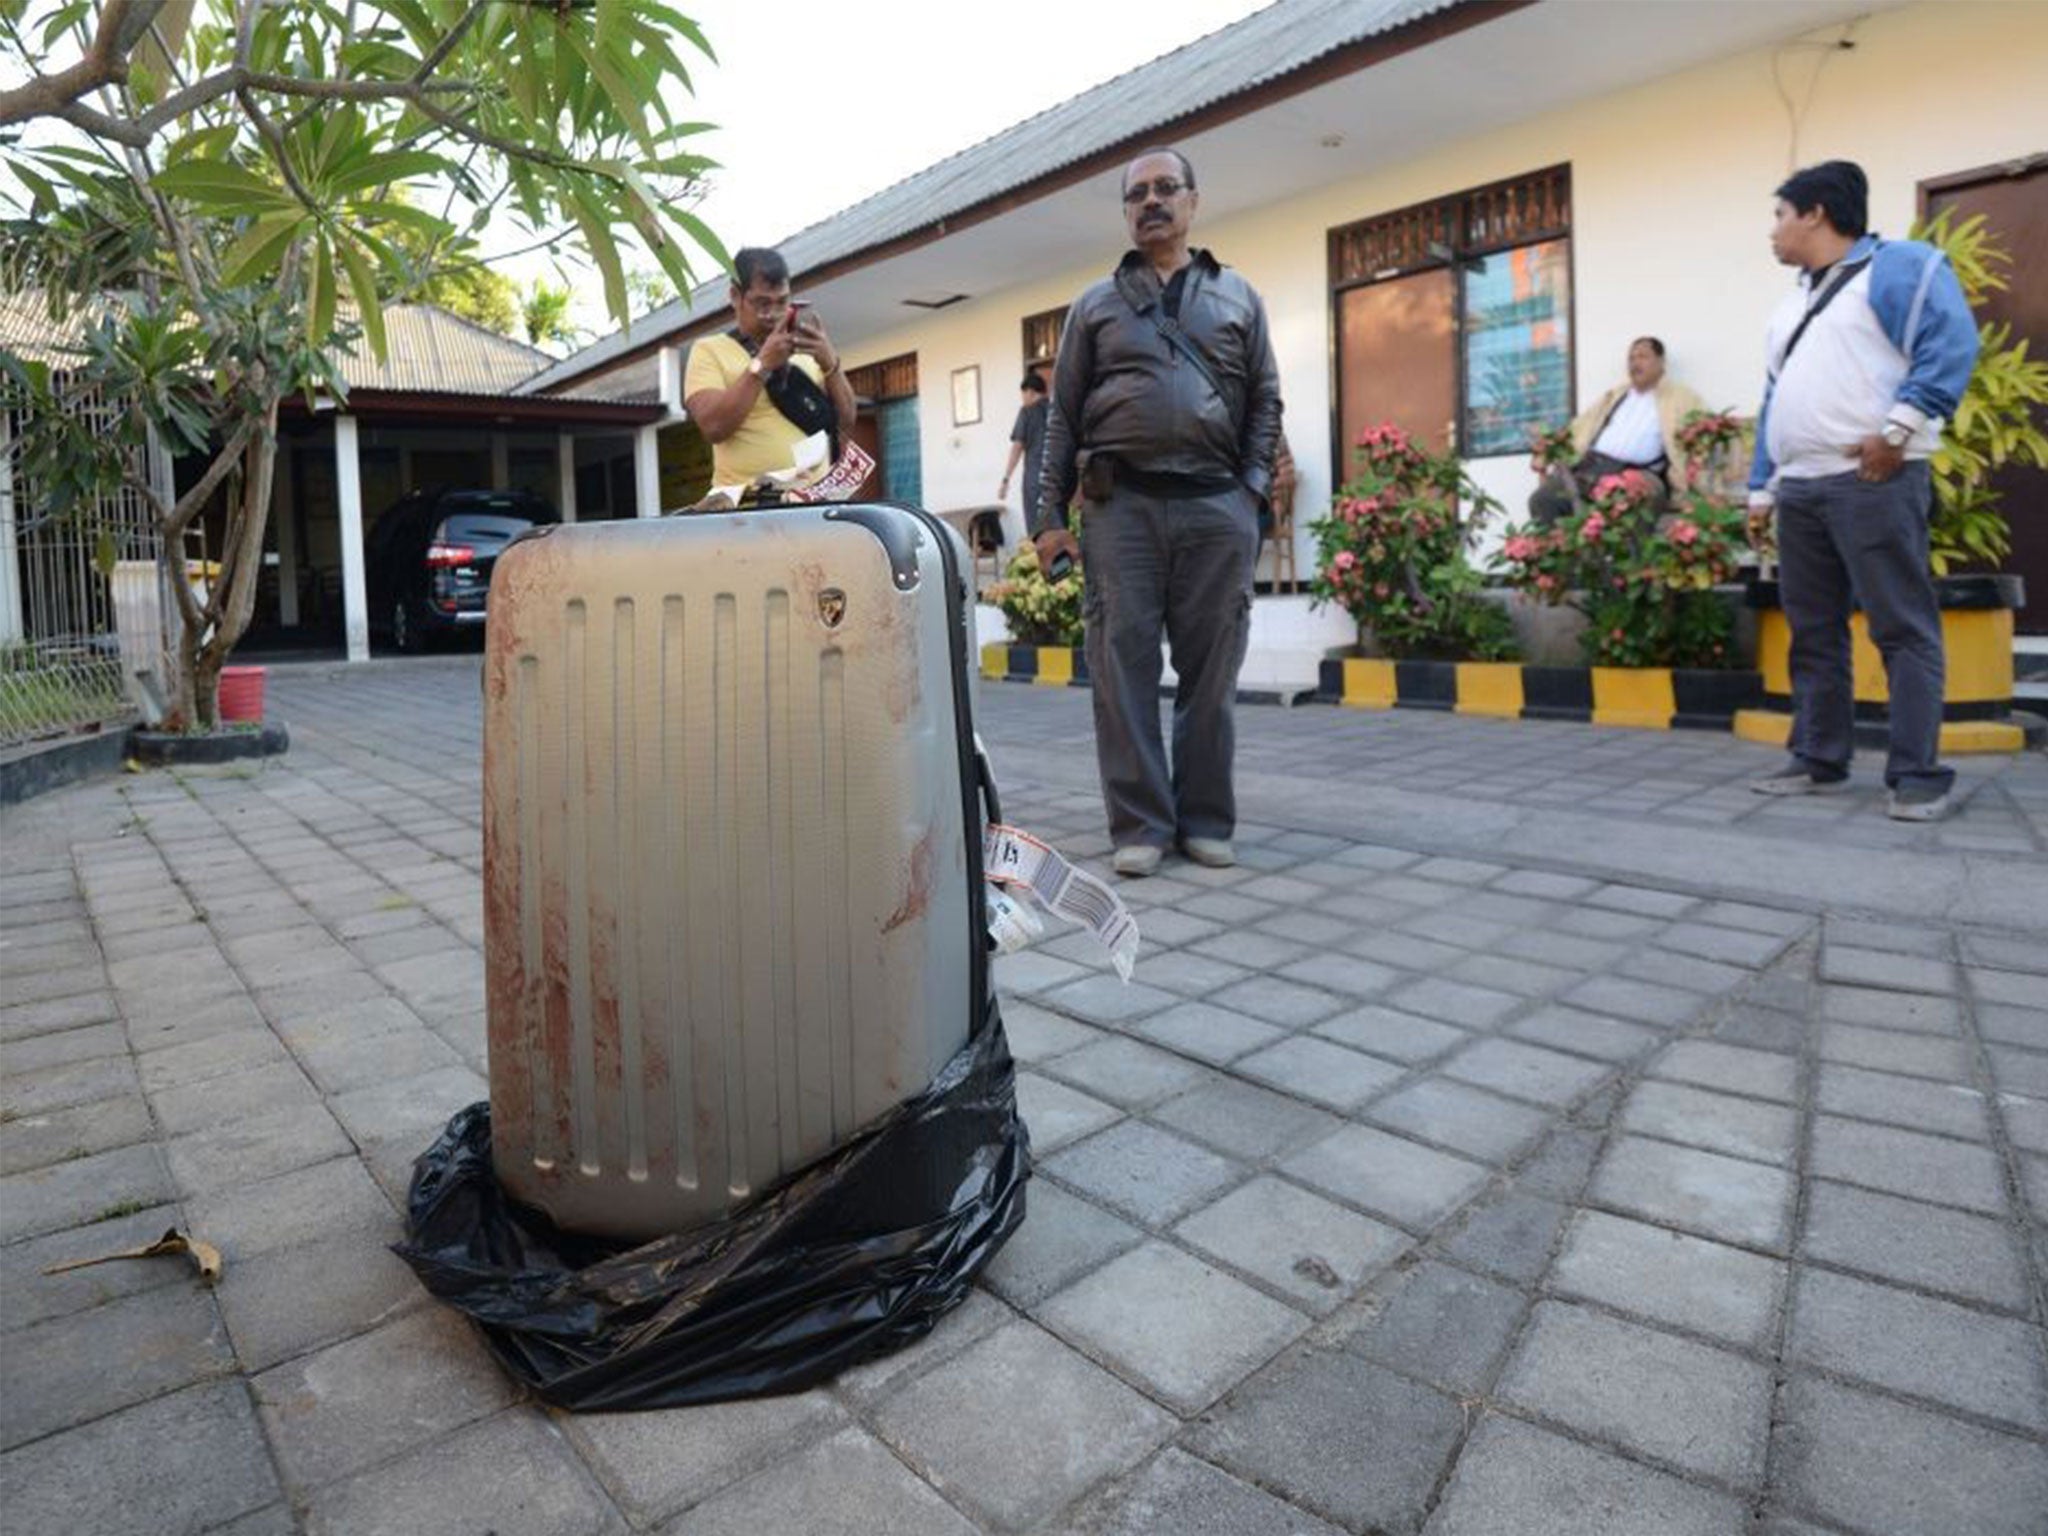 The bloody suitcase containing Sheila’s body